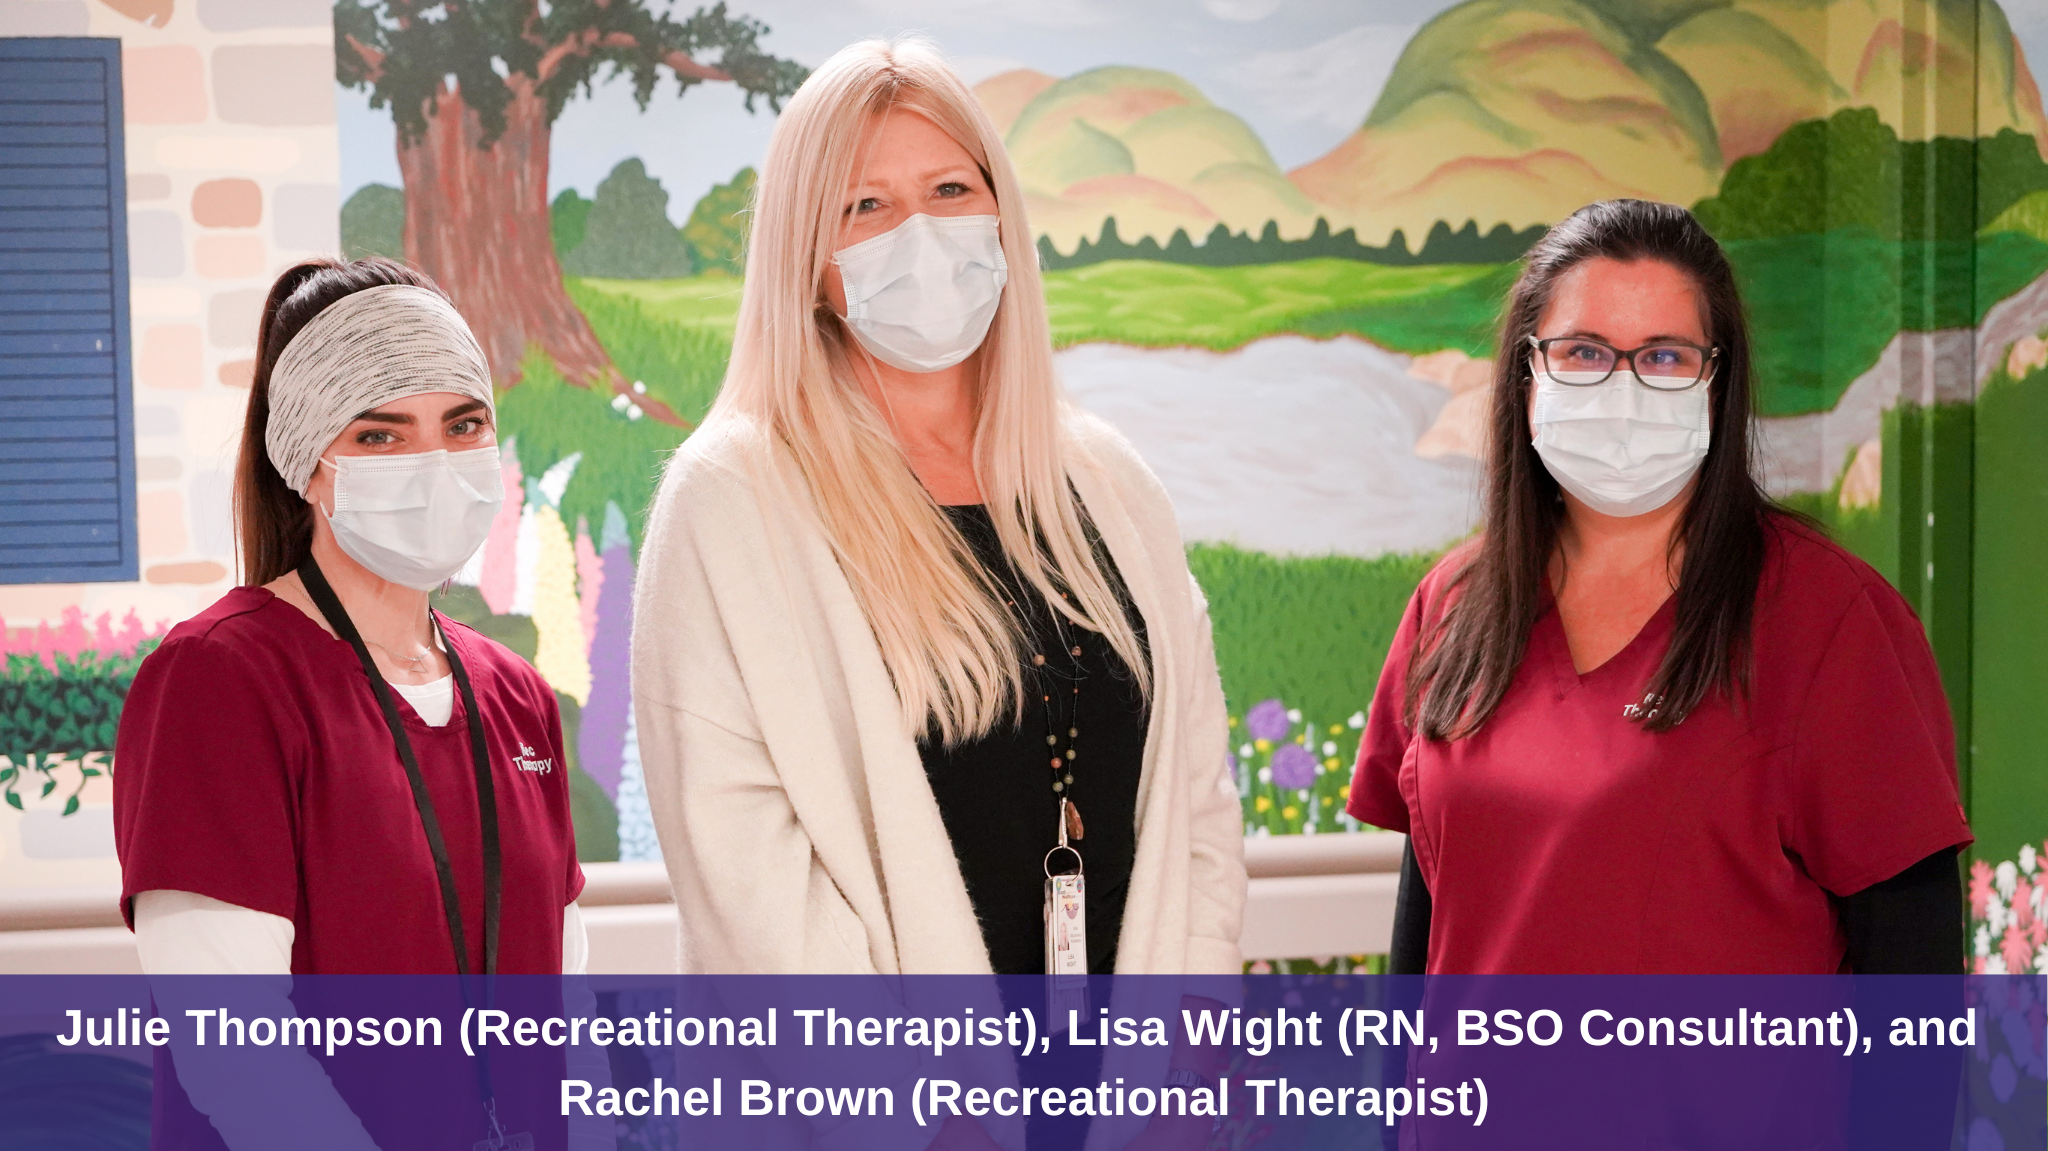 Julie Thompson (Recreational Therapist), Lisa Wight (RN, BSO Consultant), and Rachel Brown (Recreational Therapist)